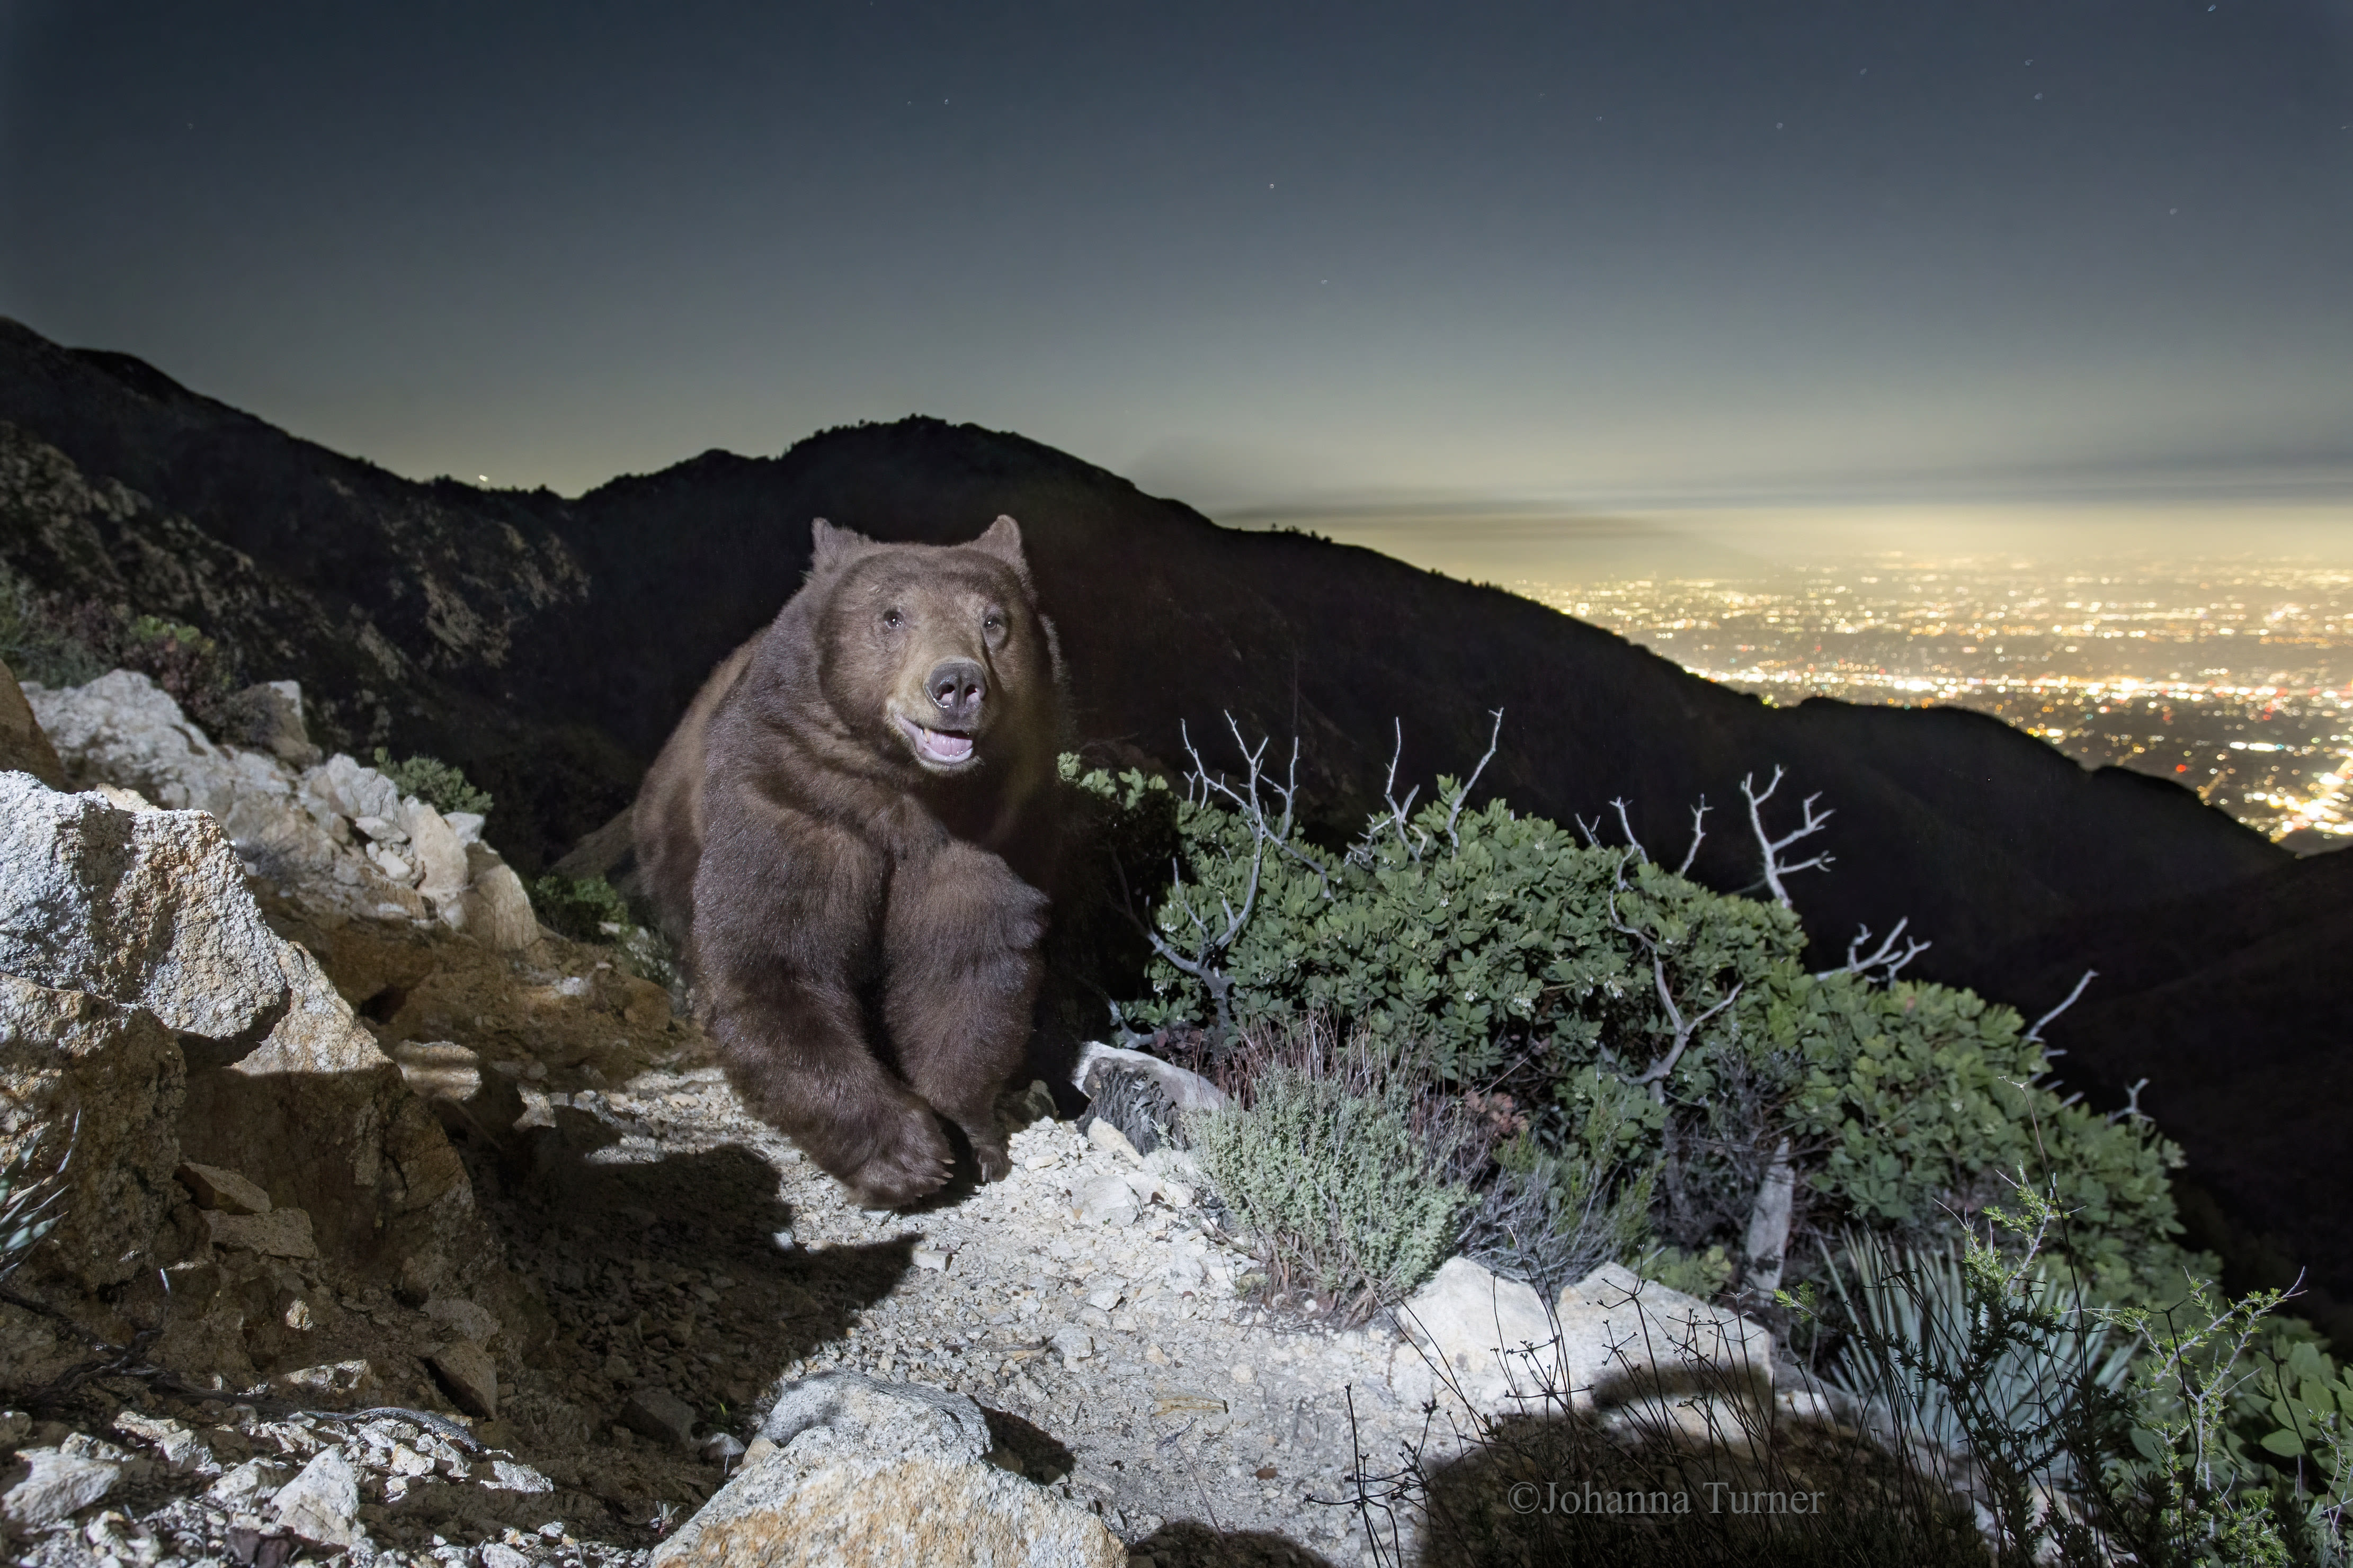 Grin and bear it: Photographer snaps rare image of black bear appearing to smile above Pasadena